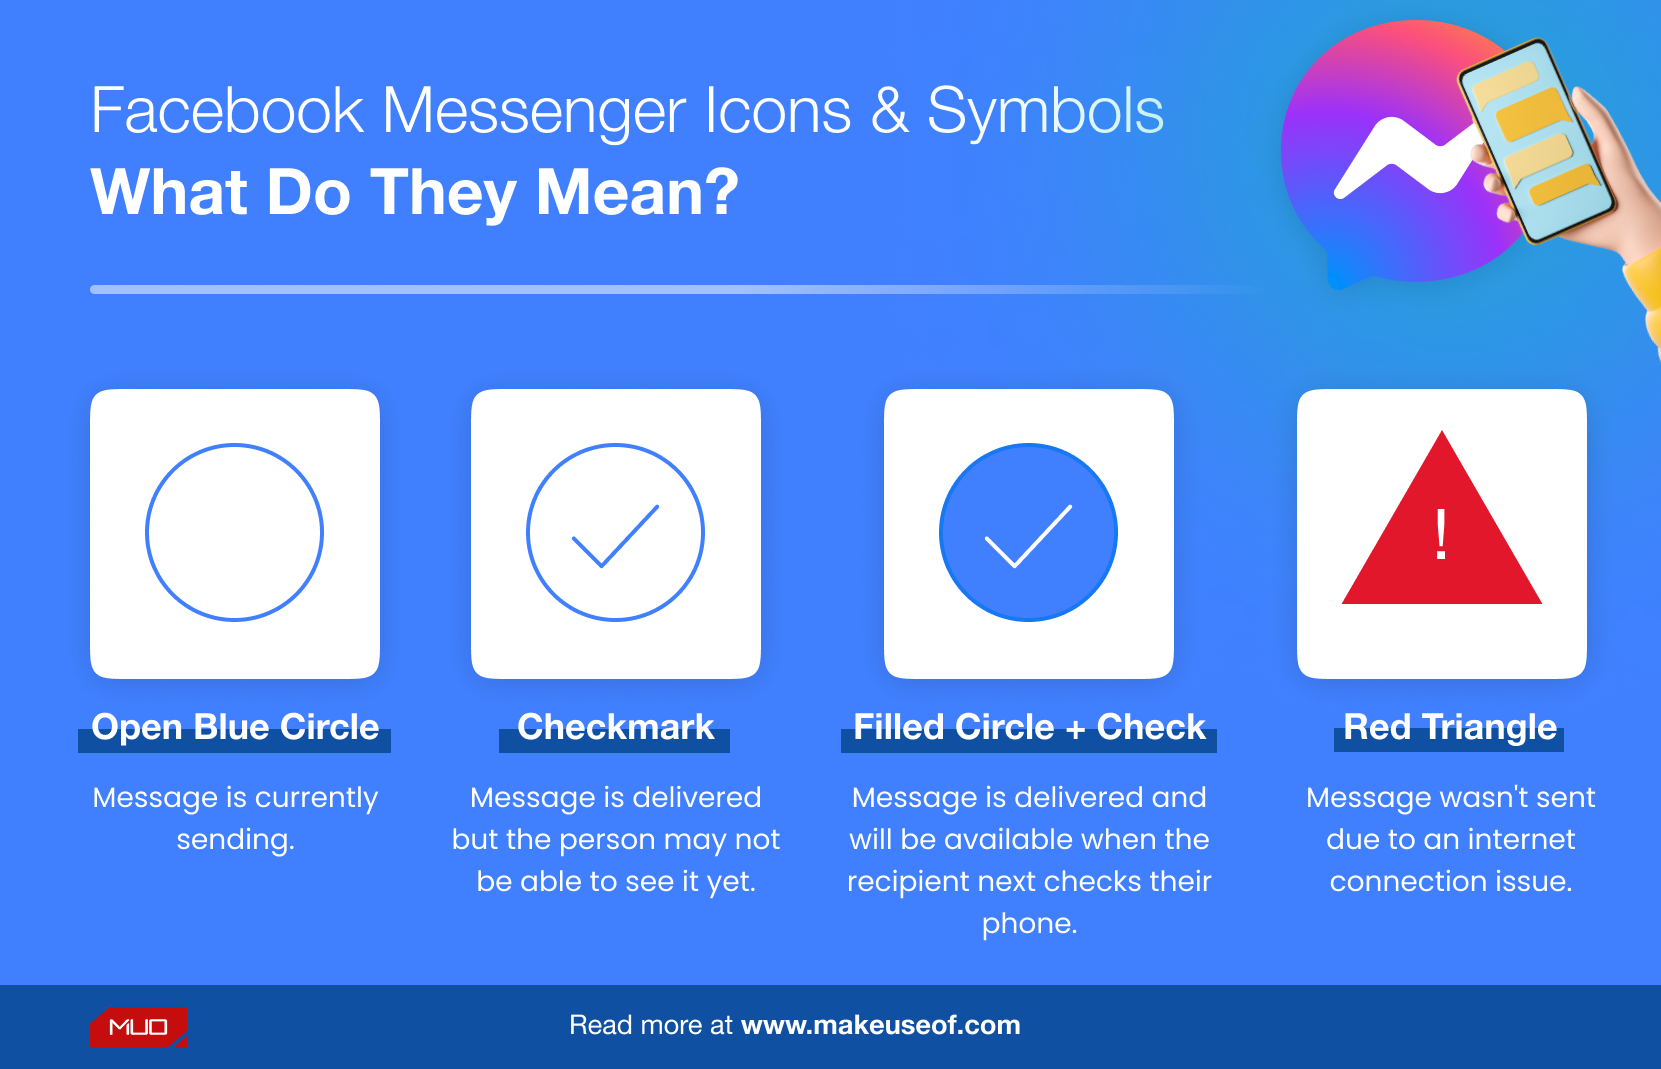 Infographic on Facebook Messenger Icons and Symbols: What Do They Mean?